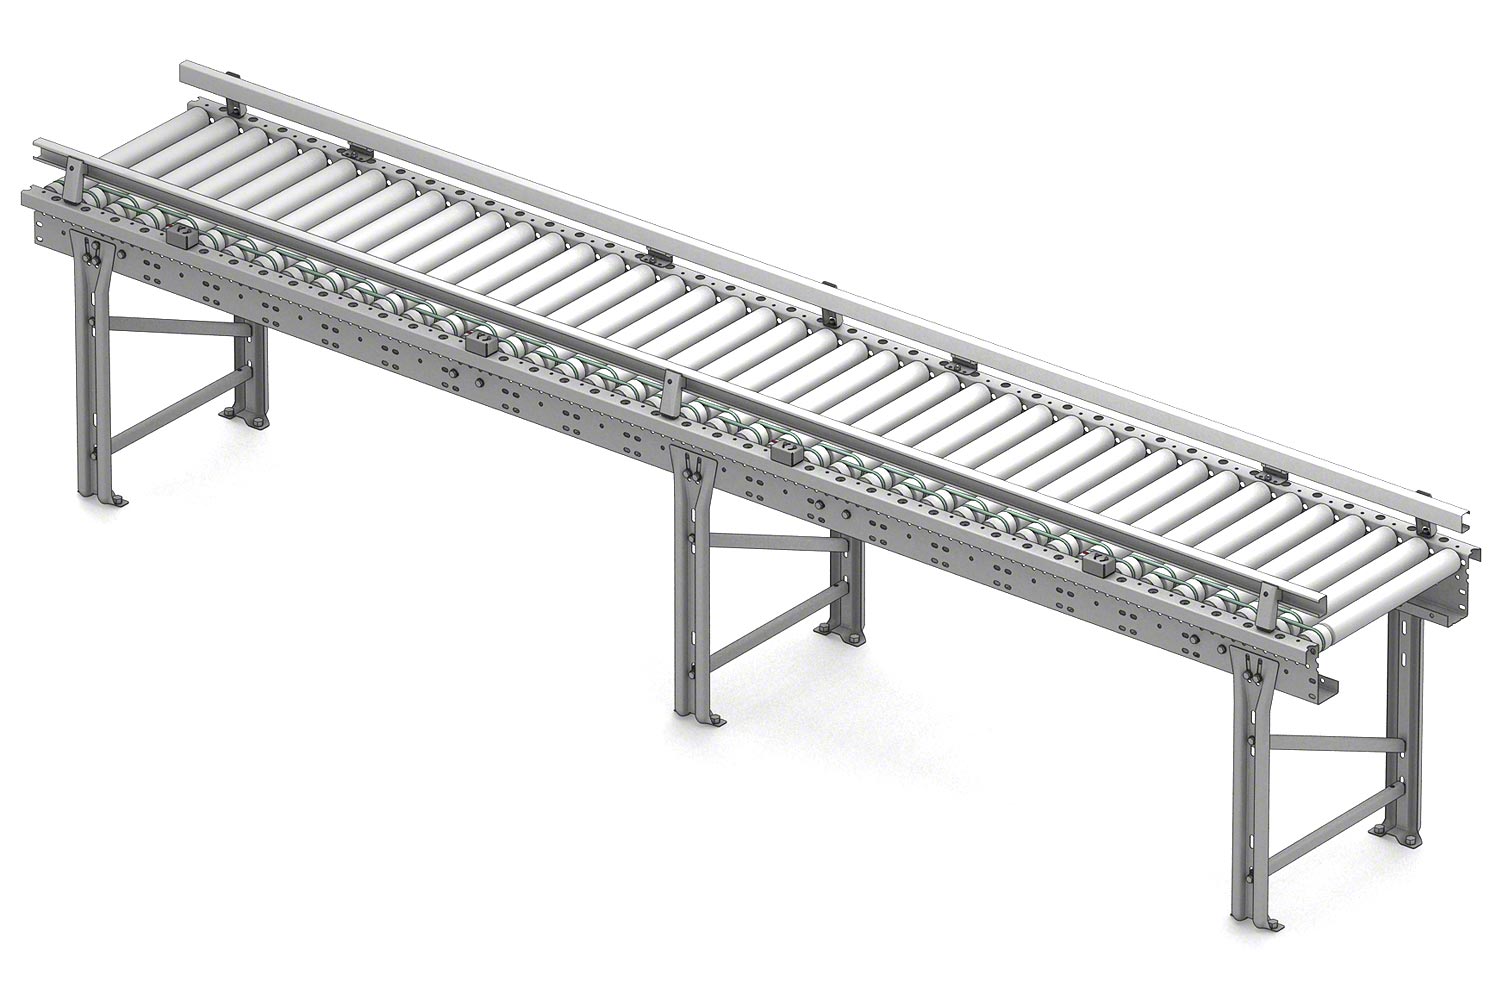 Conveyors systems for boxes